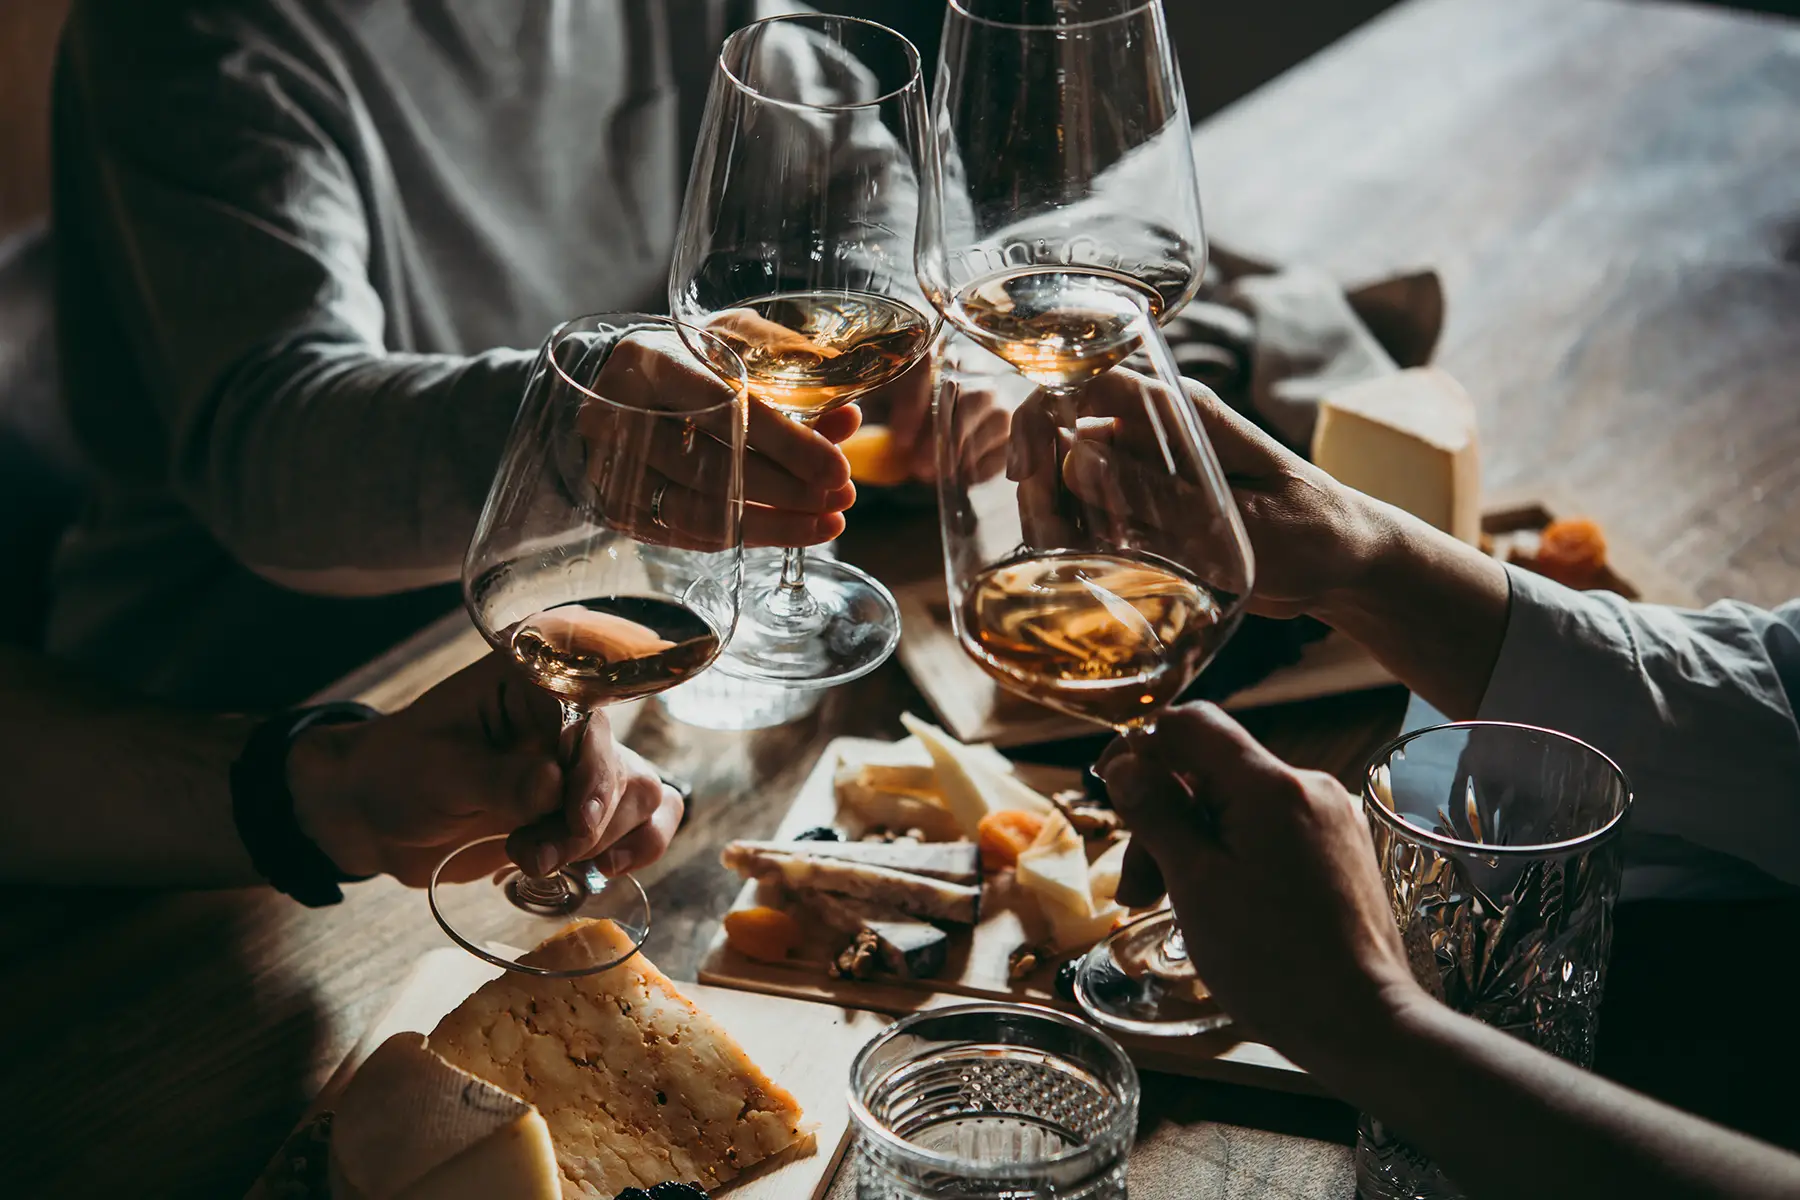 Friends enjoying wine and cheese together